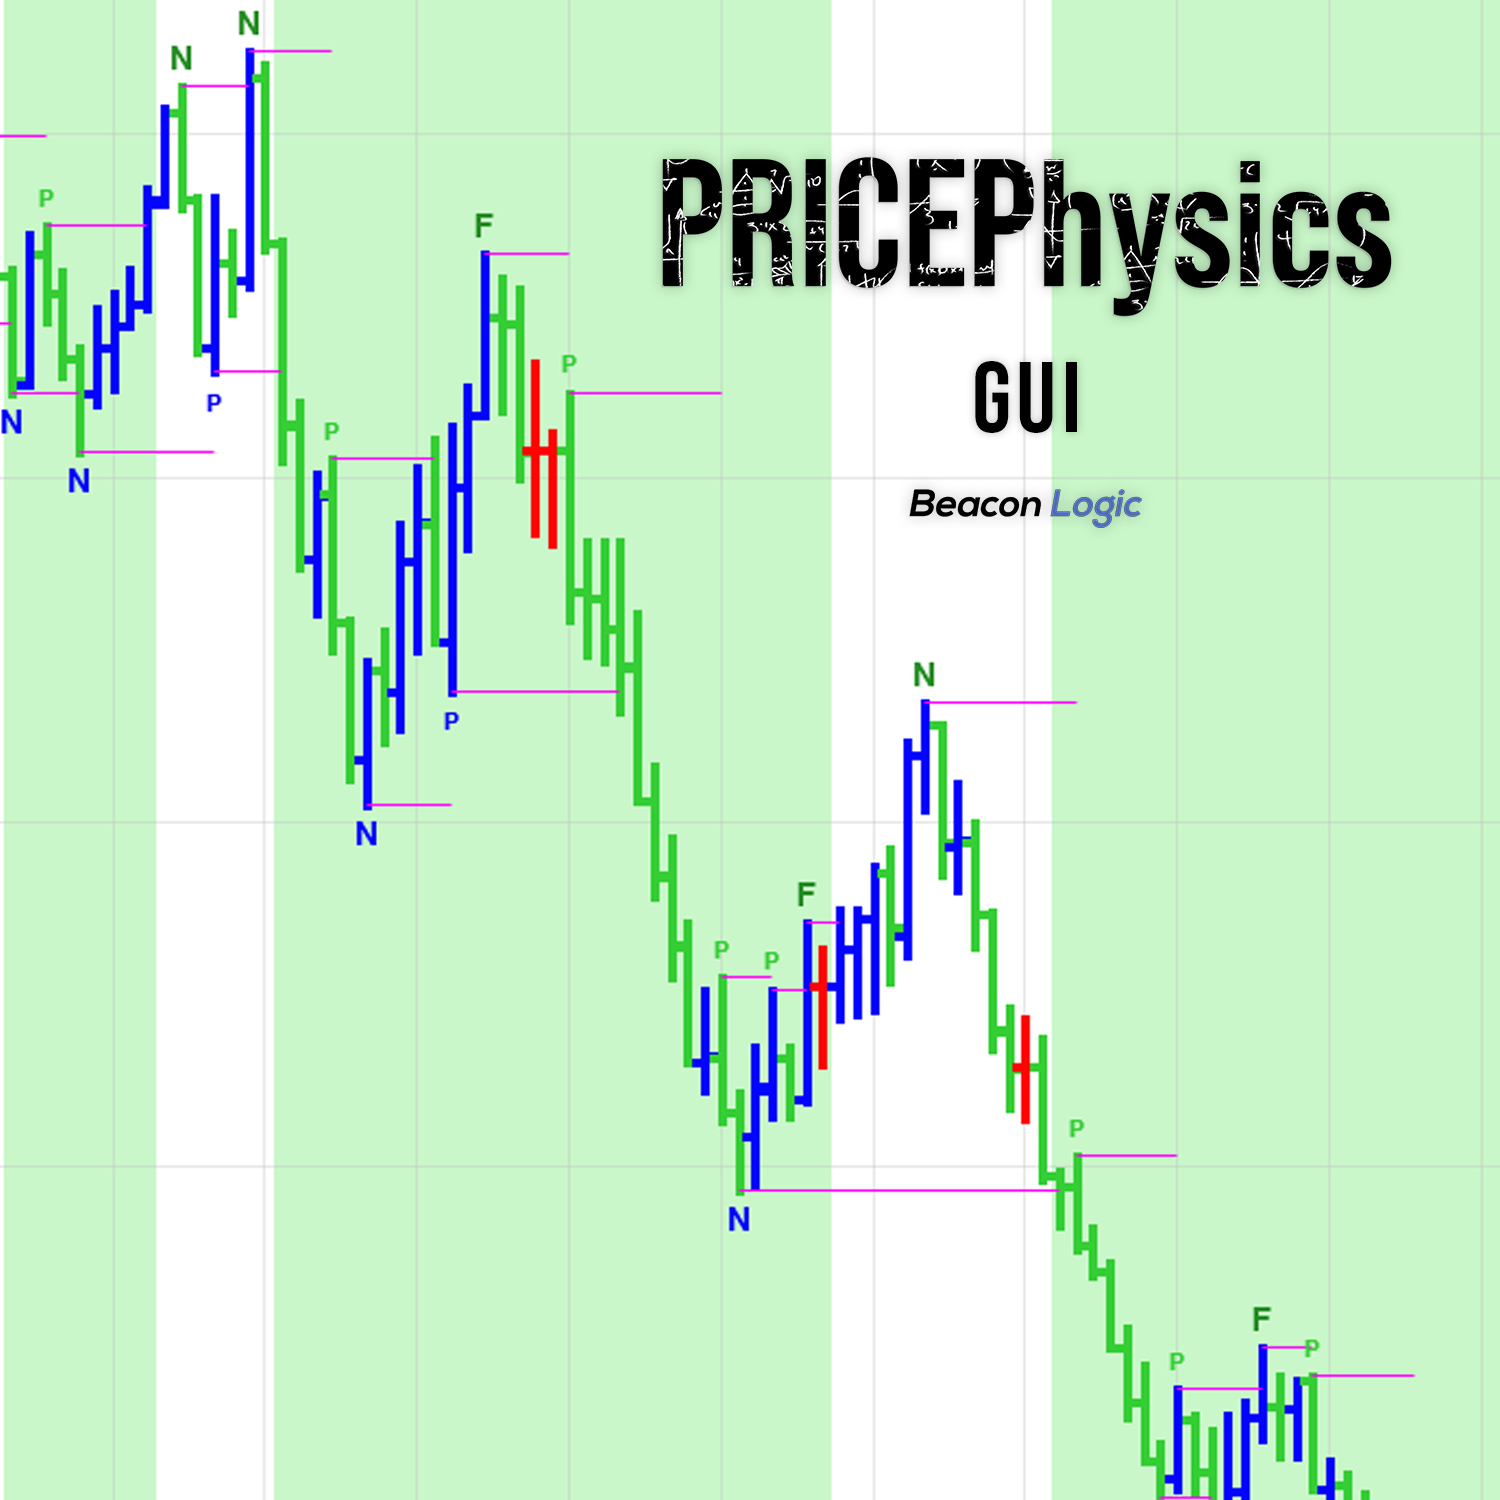 PRICEPhysics GUI showing failures of support and resistance